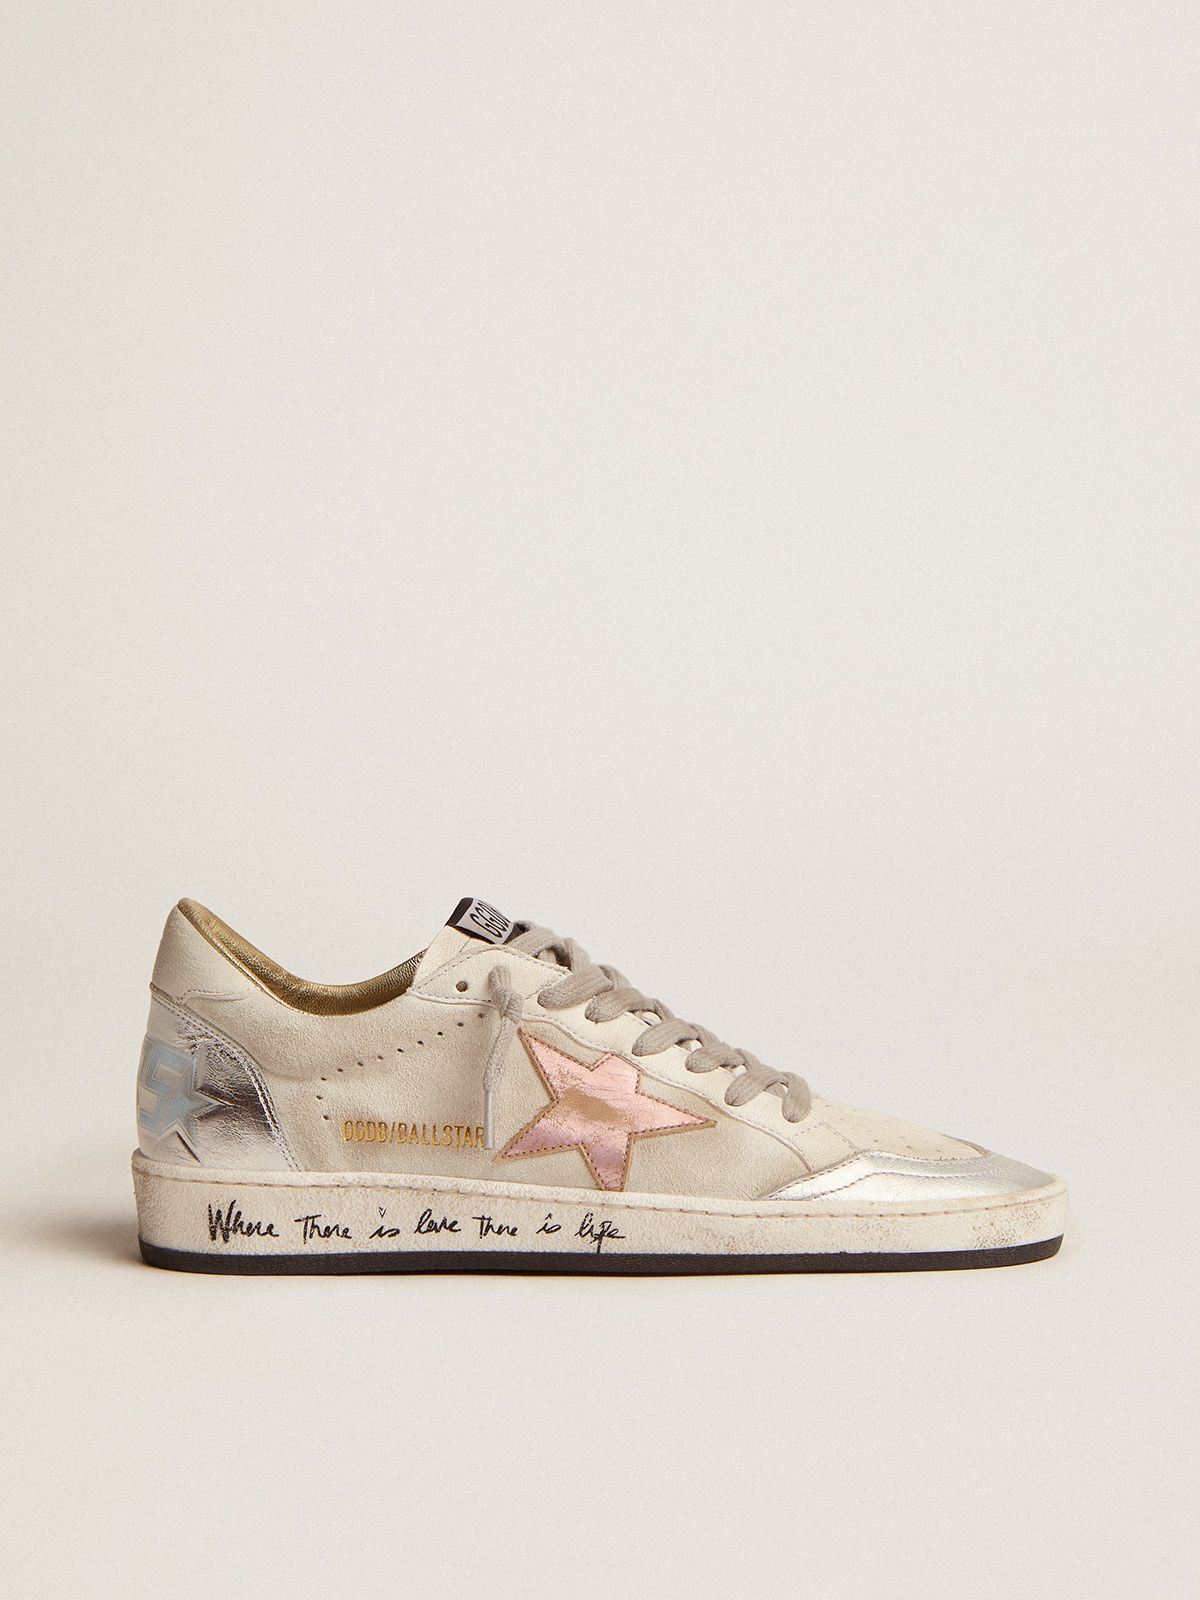 Womens new arrivals: clothing and sneakers | Golden Goose